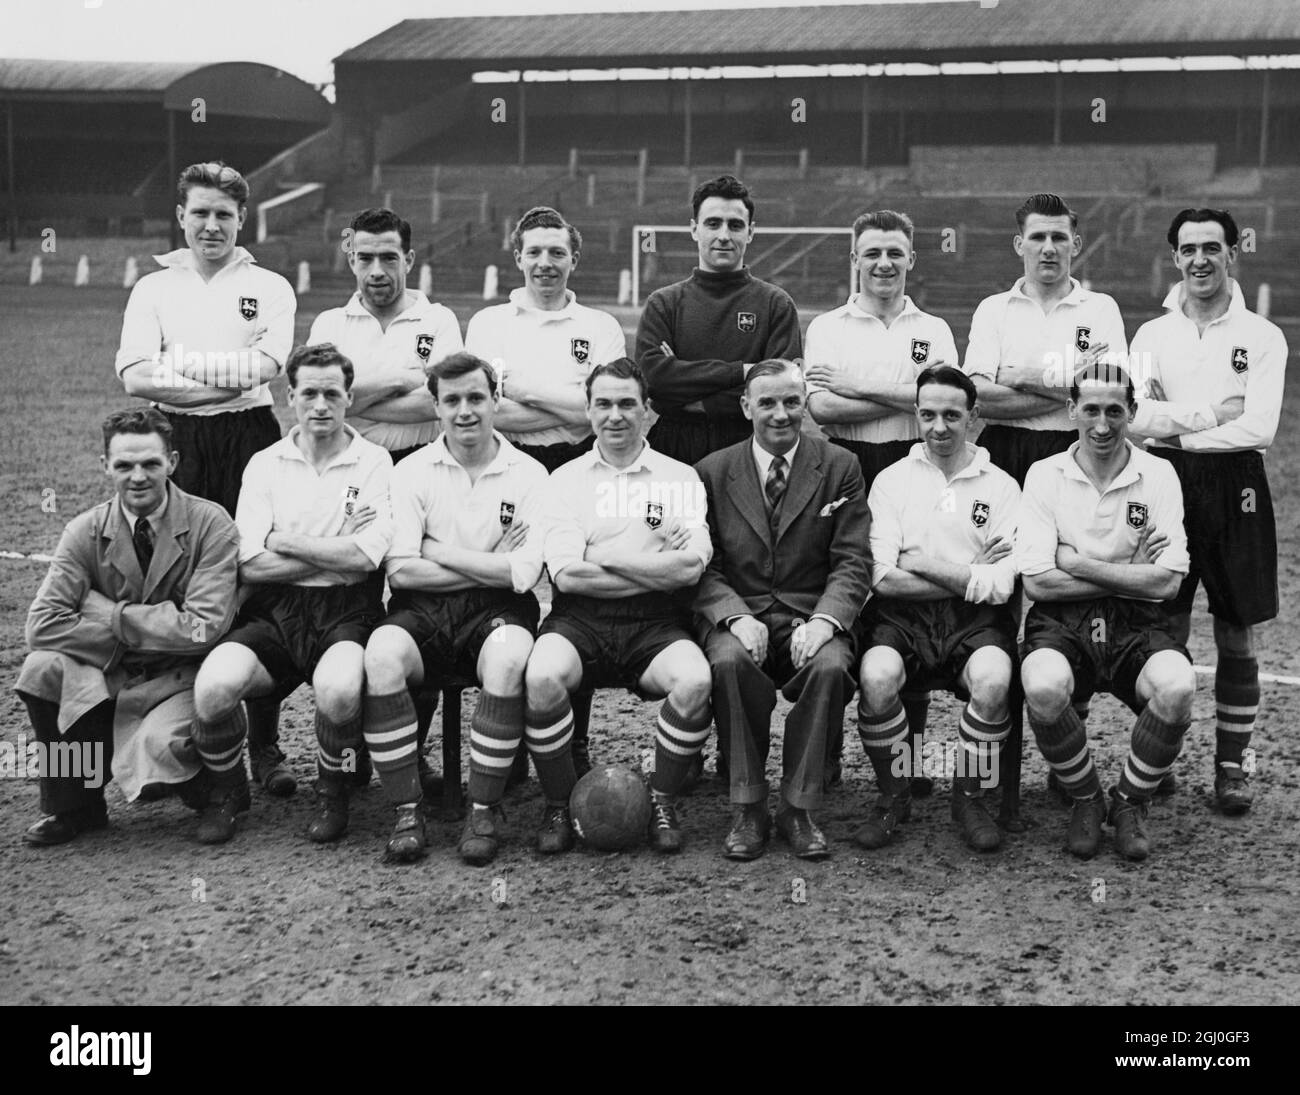 The Preston North End team to meet West Bromwich Albion in the Cup Final at Wembley on May 1st. Photo shows: (left to right front row) J. Milne (trainer), Finney, Foster, Wayman, Scot Symon (manager), Baxter and Morrison. (left to right, standing) Mattinson, Cunningham, Walton, Thompson, Docherty, Marston and Forbes. 24th April 1954 Stock Photo